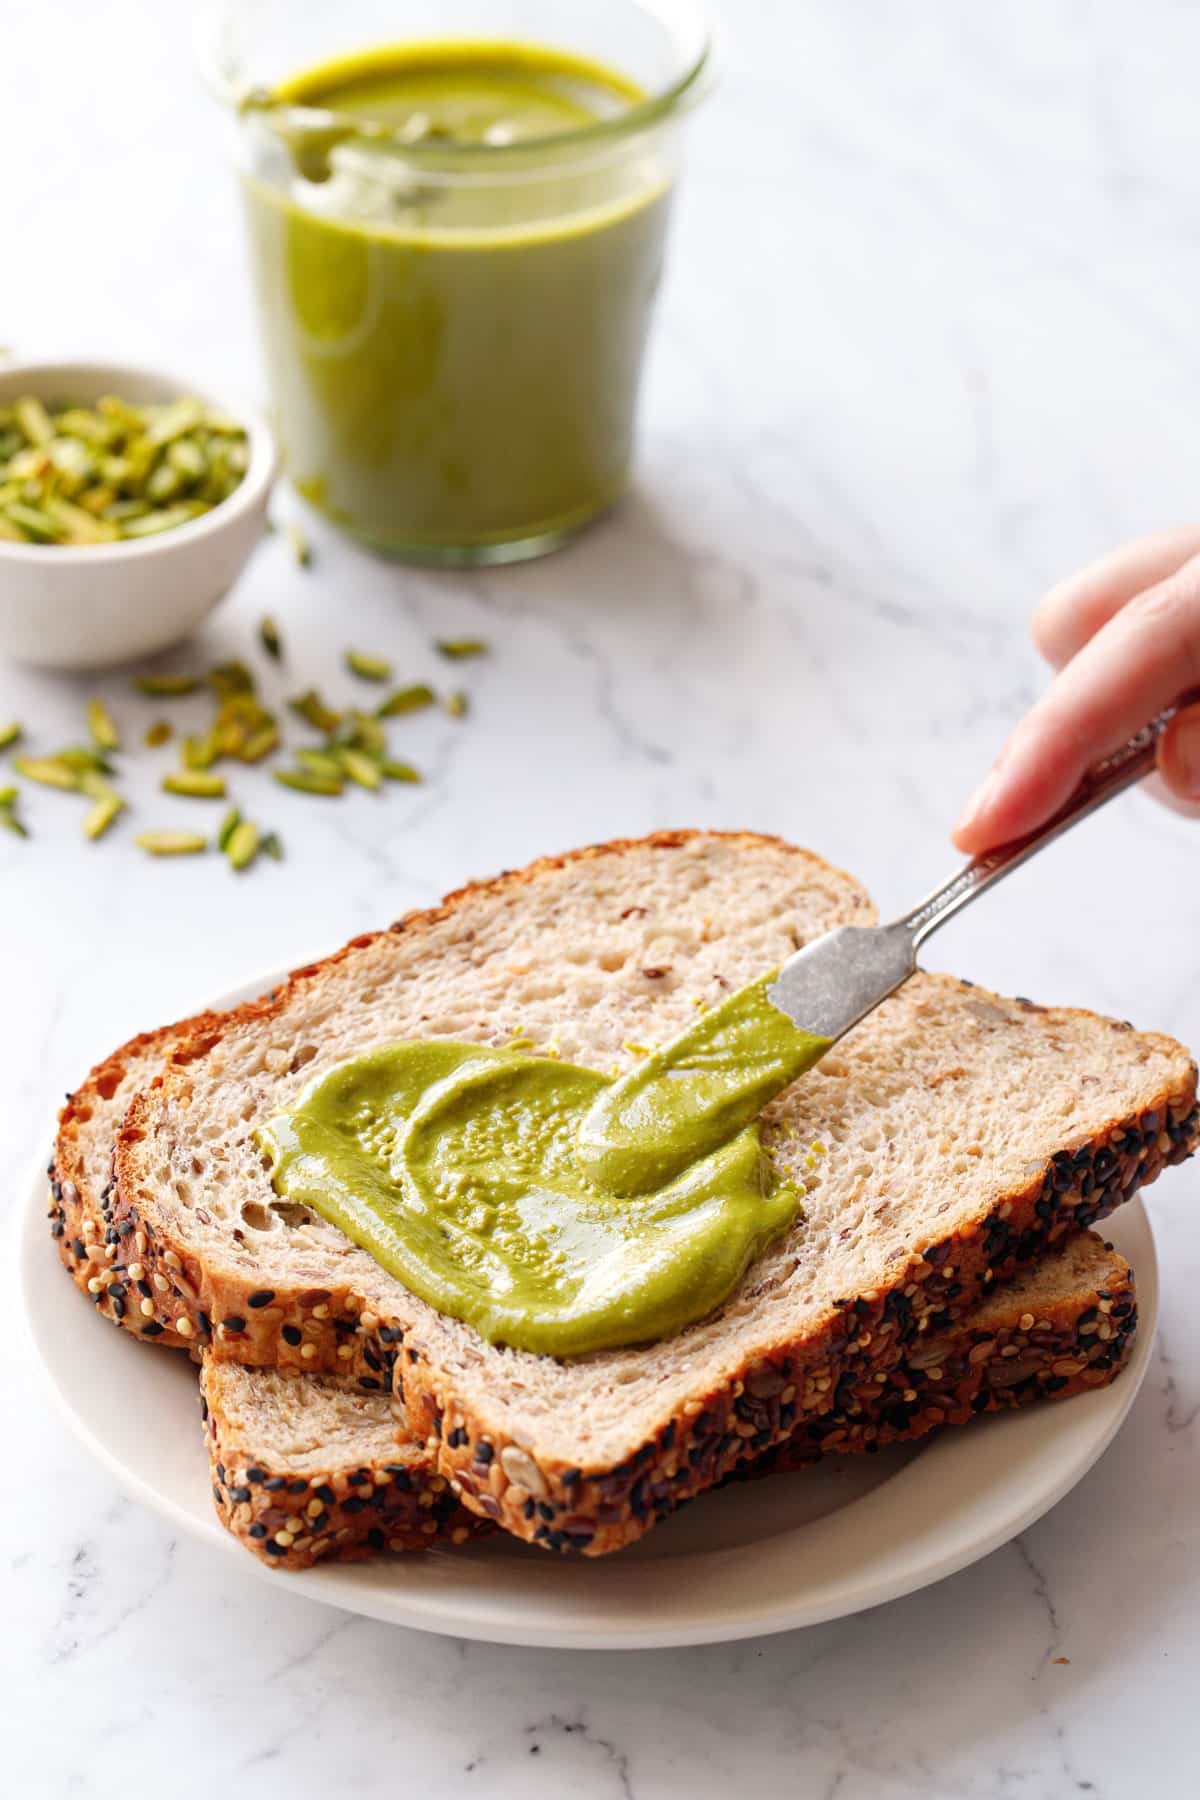 Spreading bright green Homemade Pistachio Butter onto a piece of whole wheat bread, with a jar of butter and bowl of pistachios in the background.